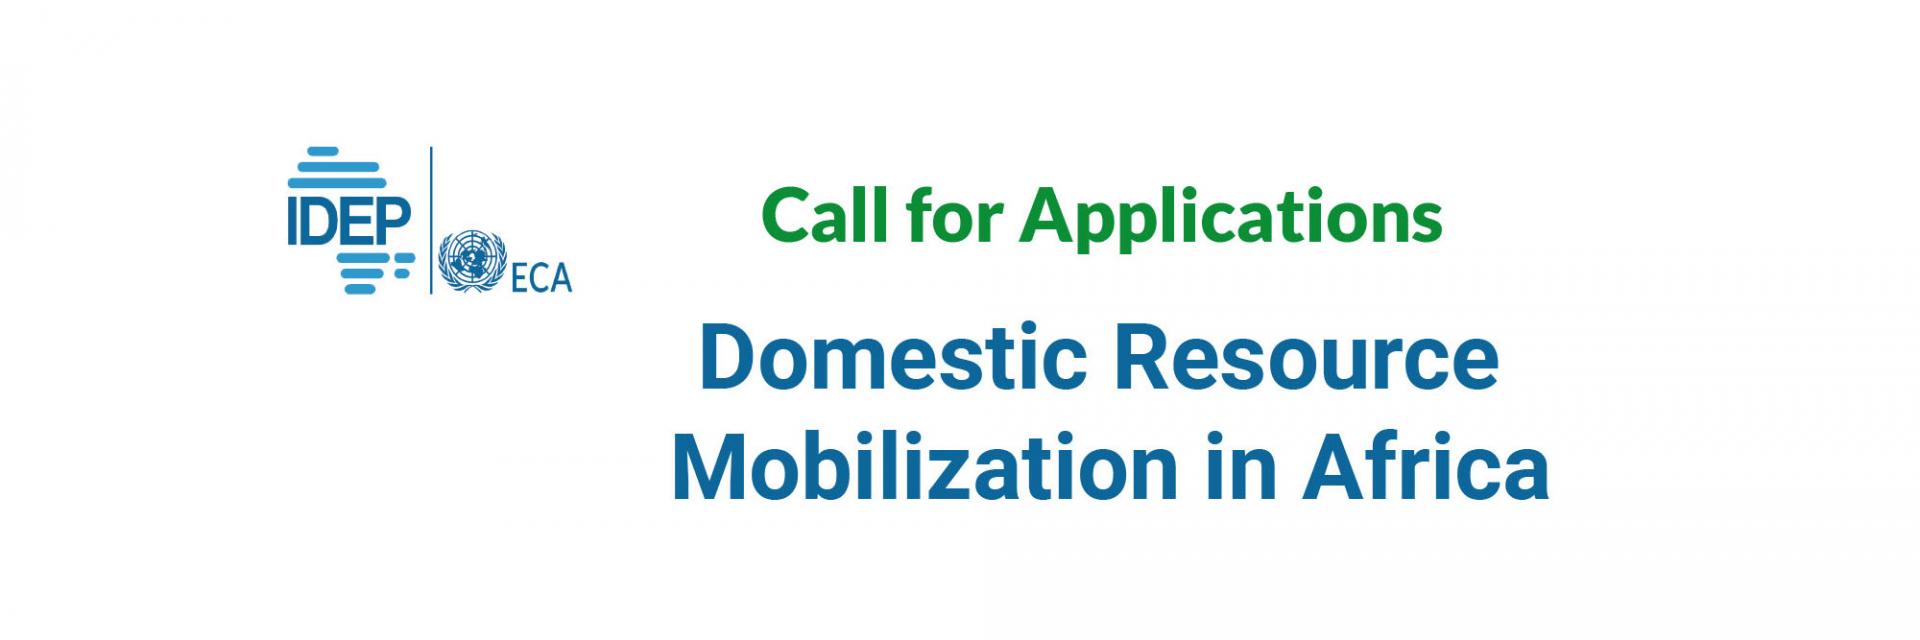 Call for Applications - Domestic Resource Mobilization in Africa